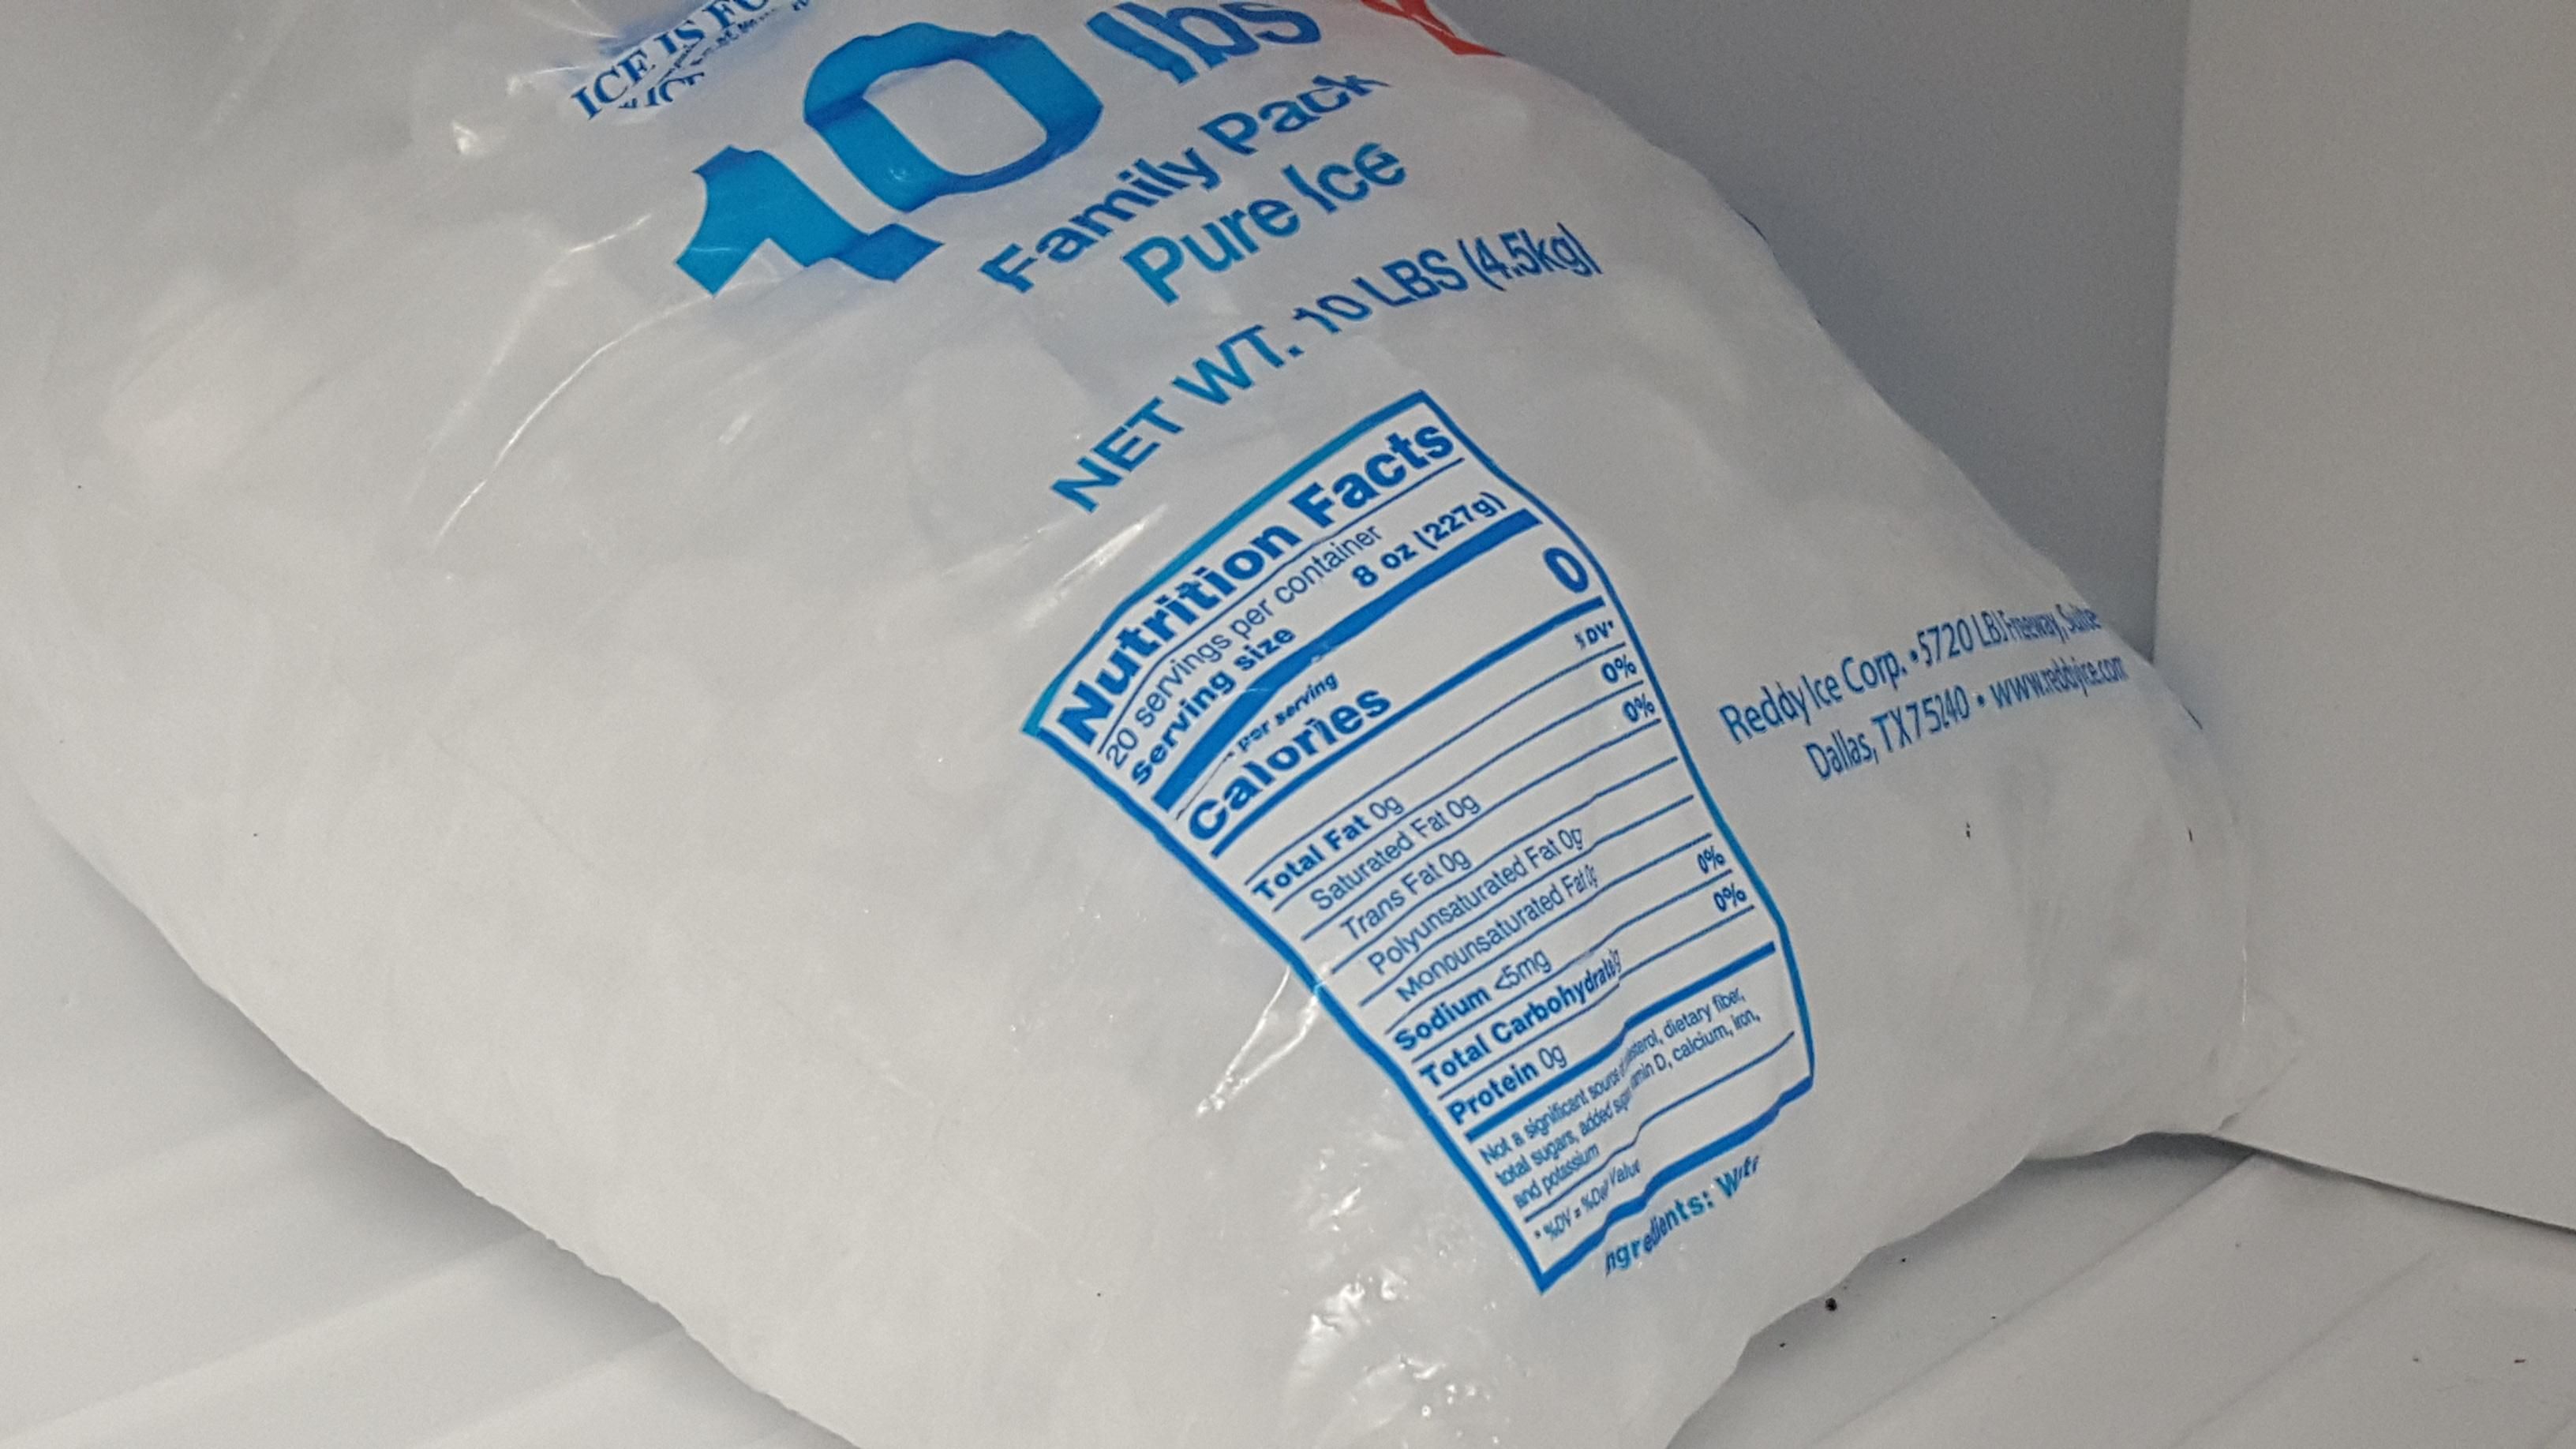 If you're ever feeling useless, remember that bags of ice have nutrition information.